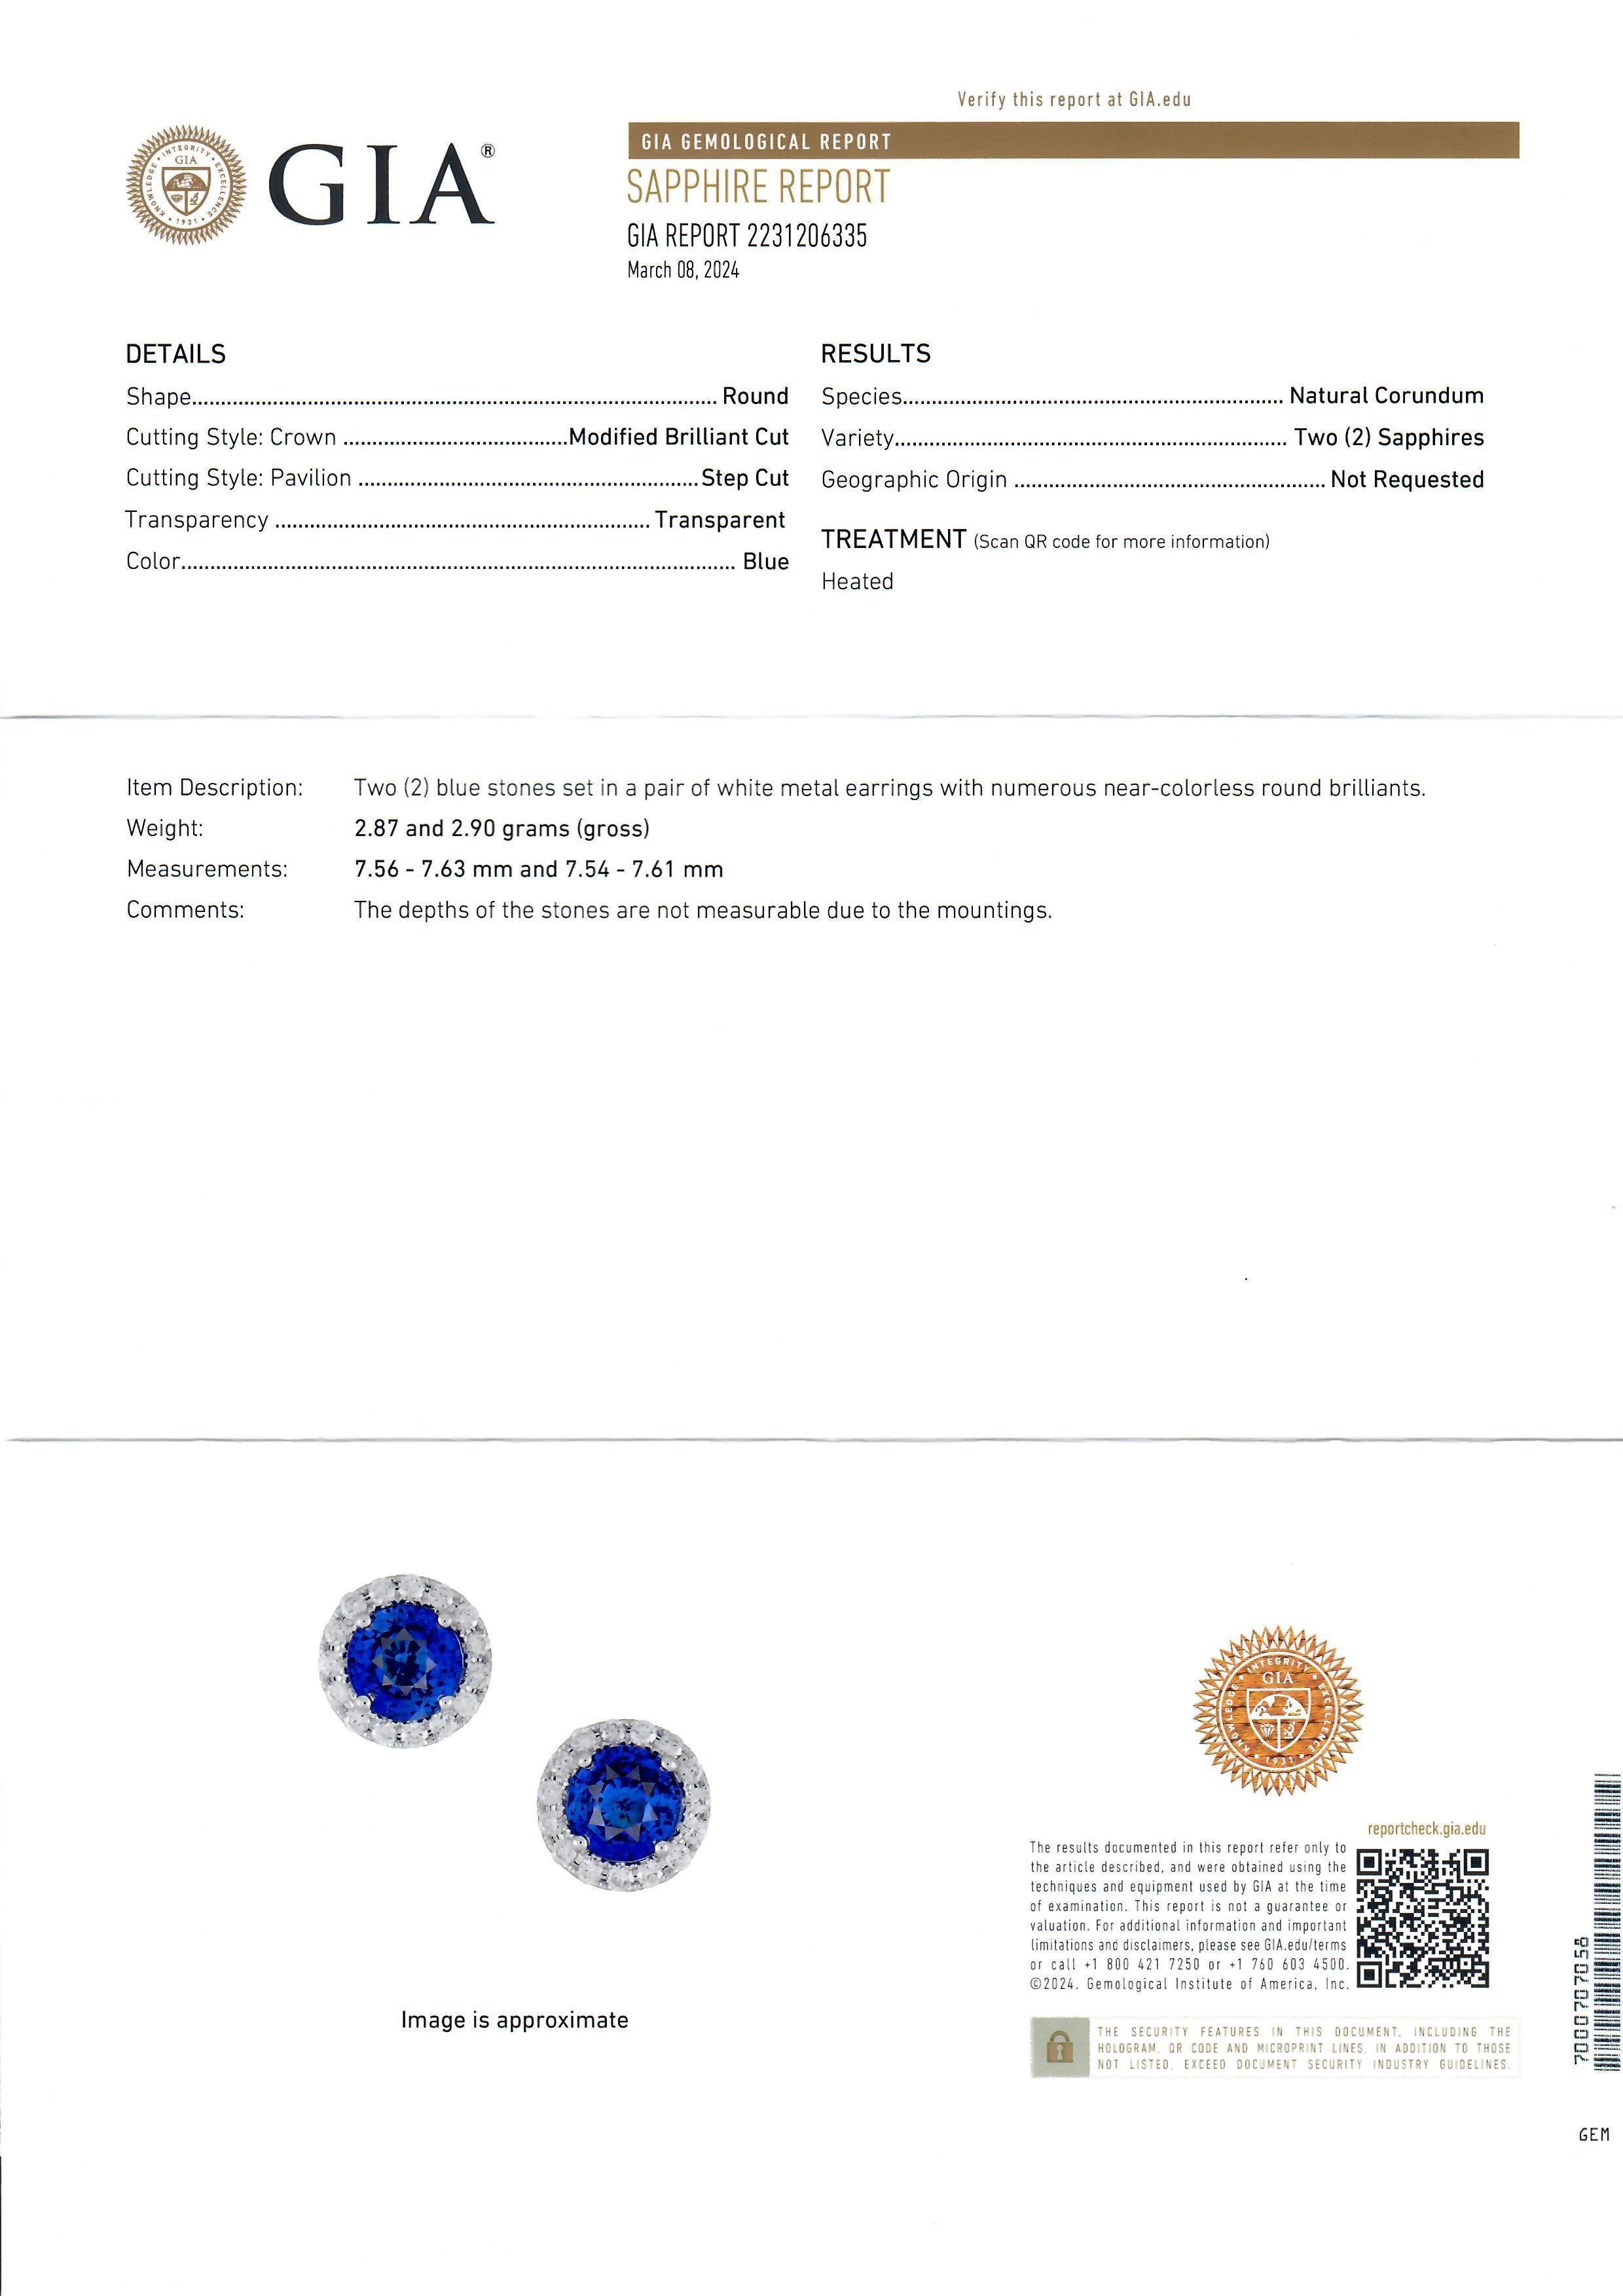 NEW 18k Gold 5.78ctw GIA Round Vivid Blue Sapphire & Diamond Halo Stud Earrings For Sale 5